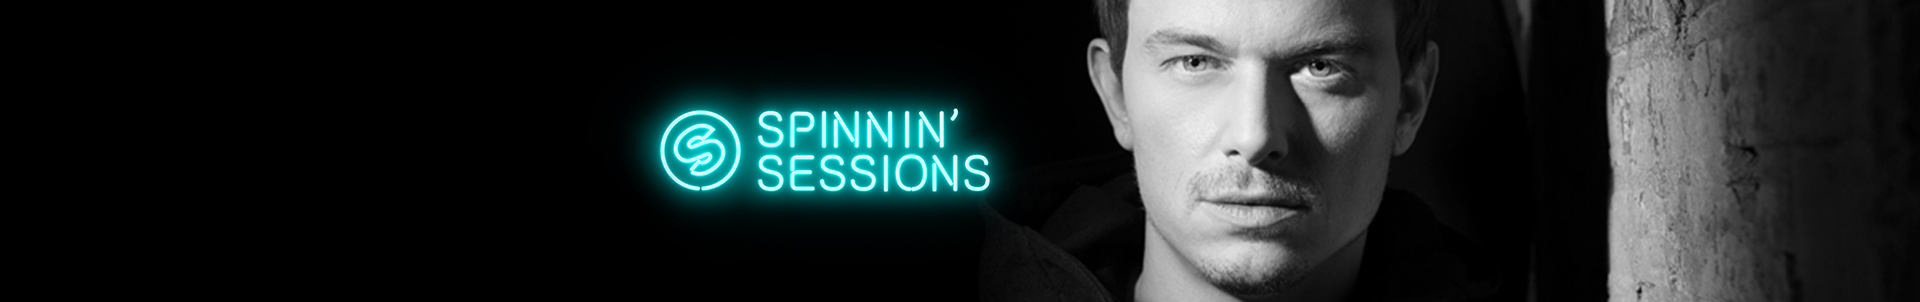 We Rave You premiere: Spinnin' Sessions with a Guest Mix by Fedde le Grand